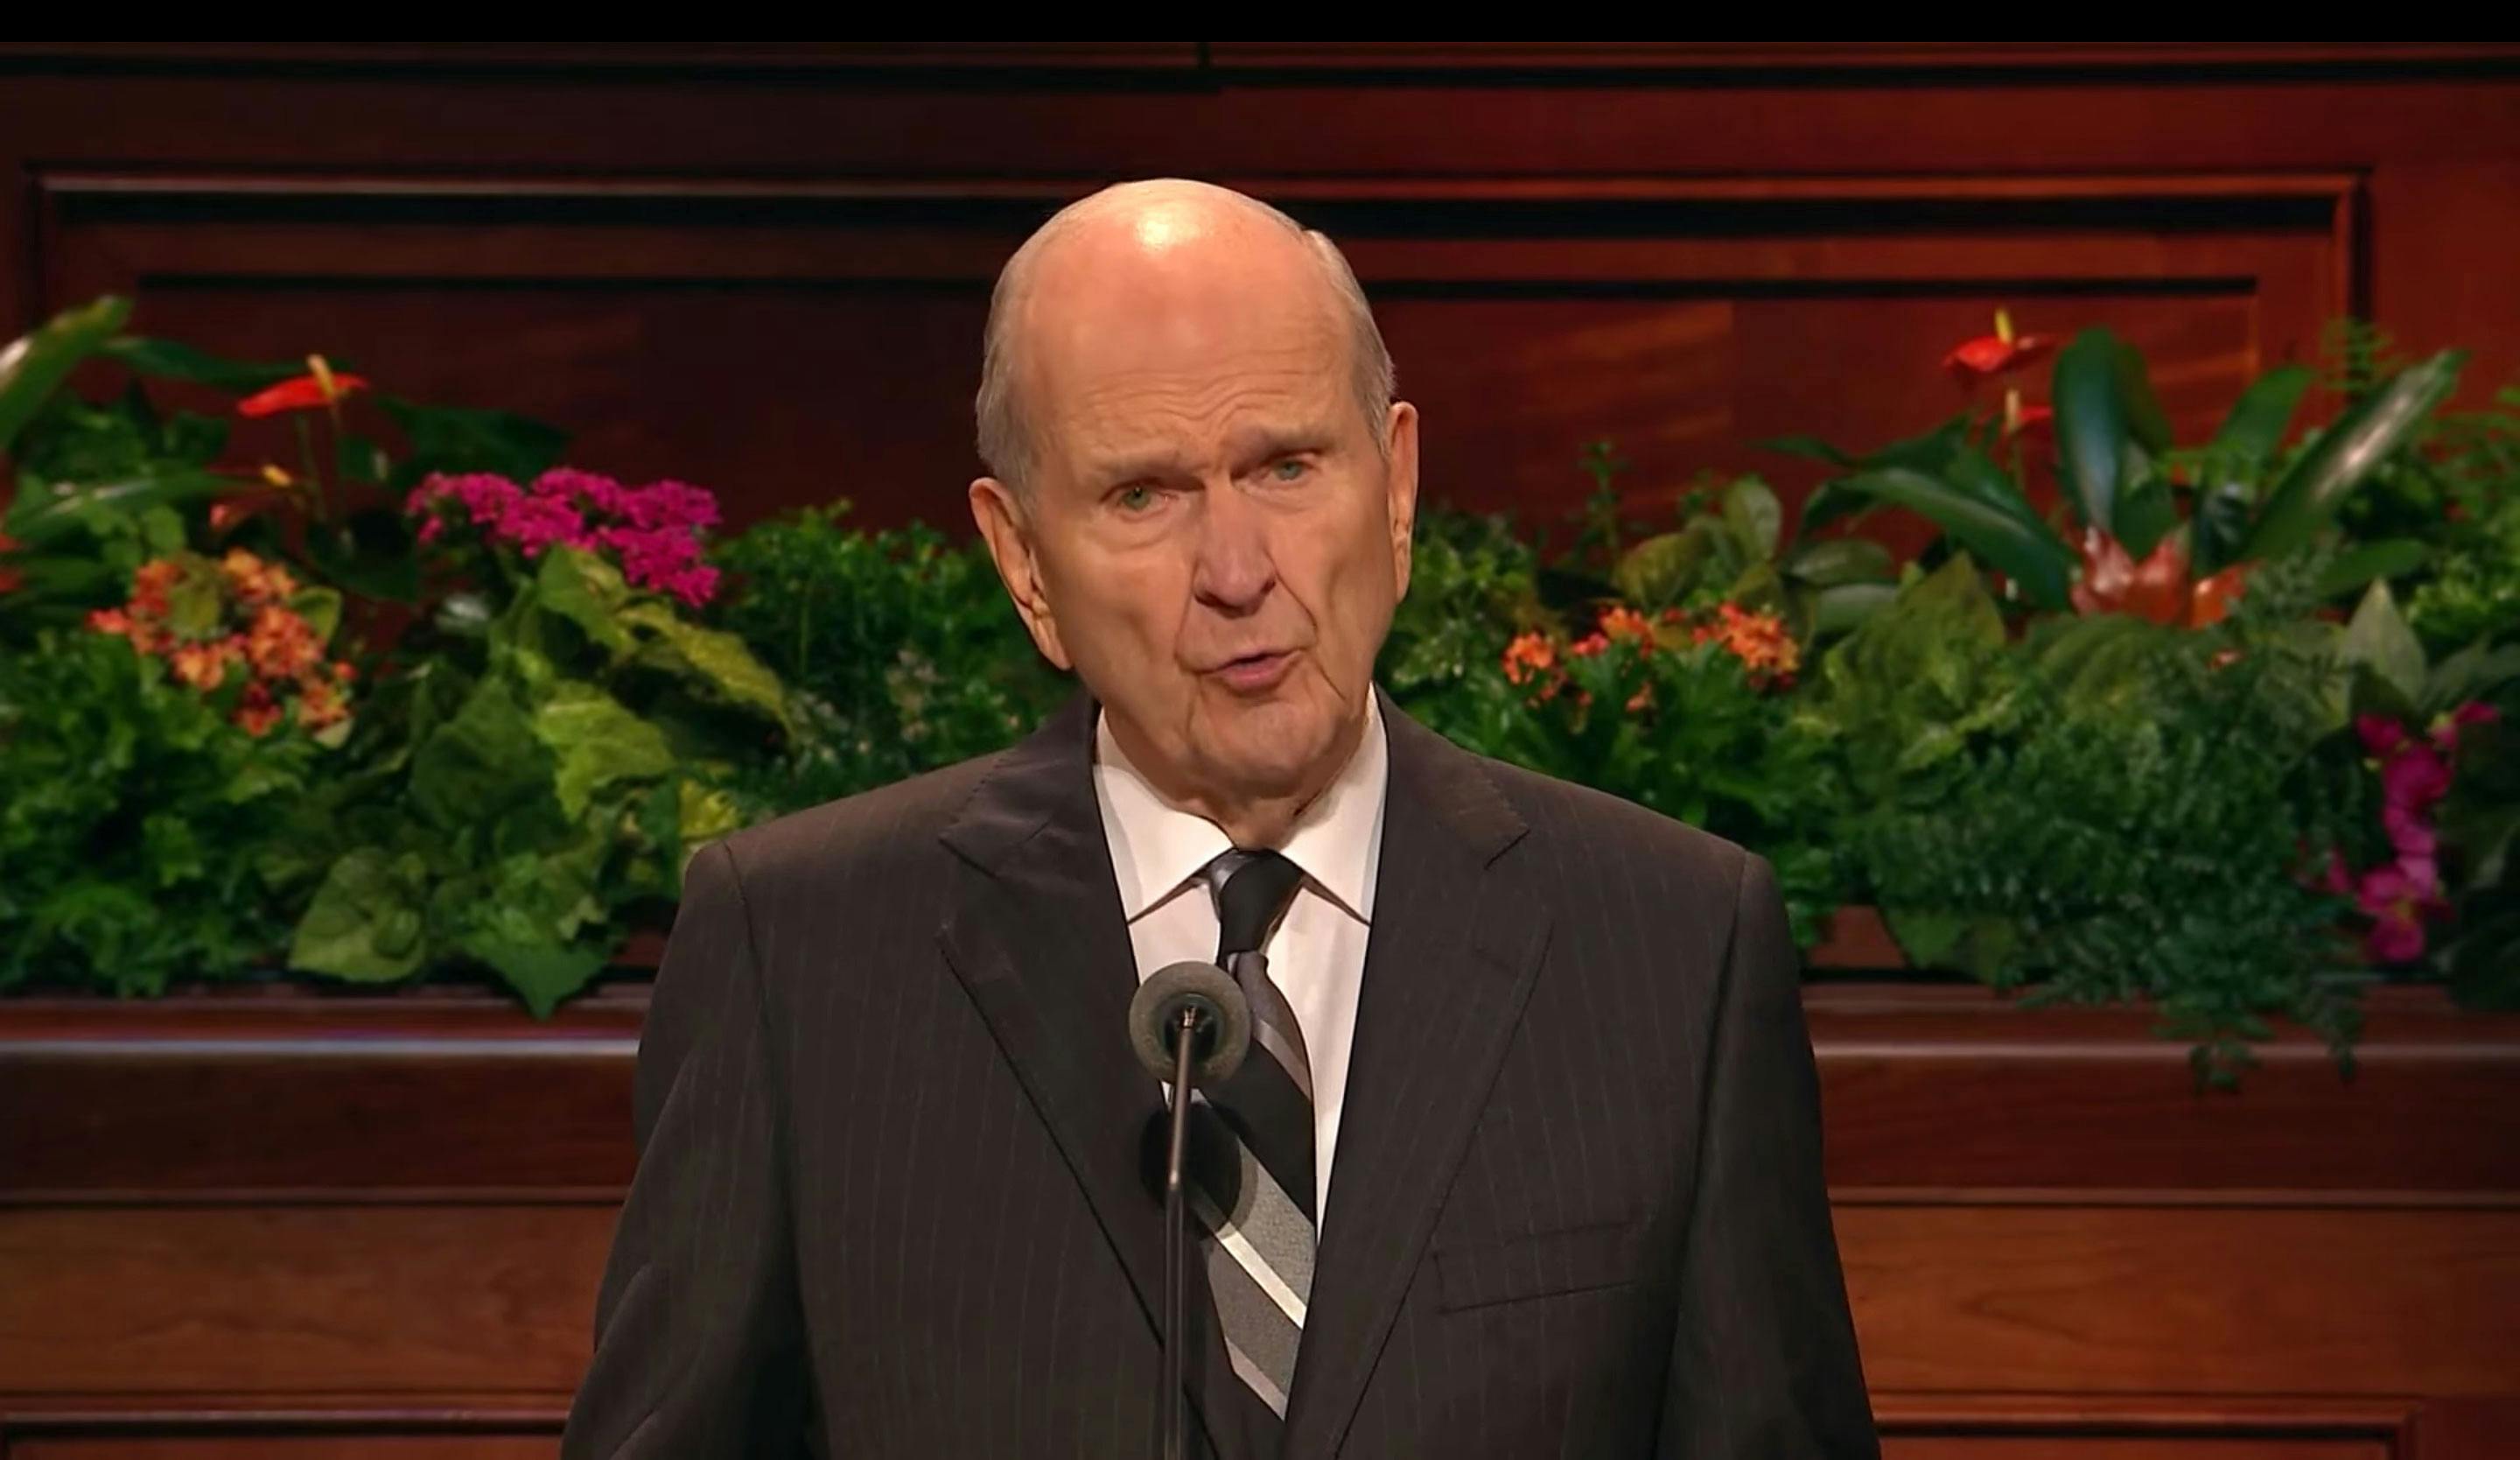 Mormon Church Backs Plan to Legalize Cannabis in Utah This Year. Here, President Russell M. Nelson appears opening the Saturday morning session of the 188th Semiannual General Conference of the Church at the Conference Center in Salt Lake City on October 6, 2018.